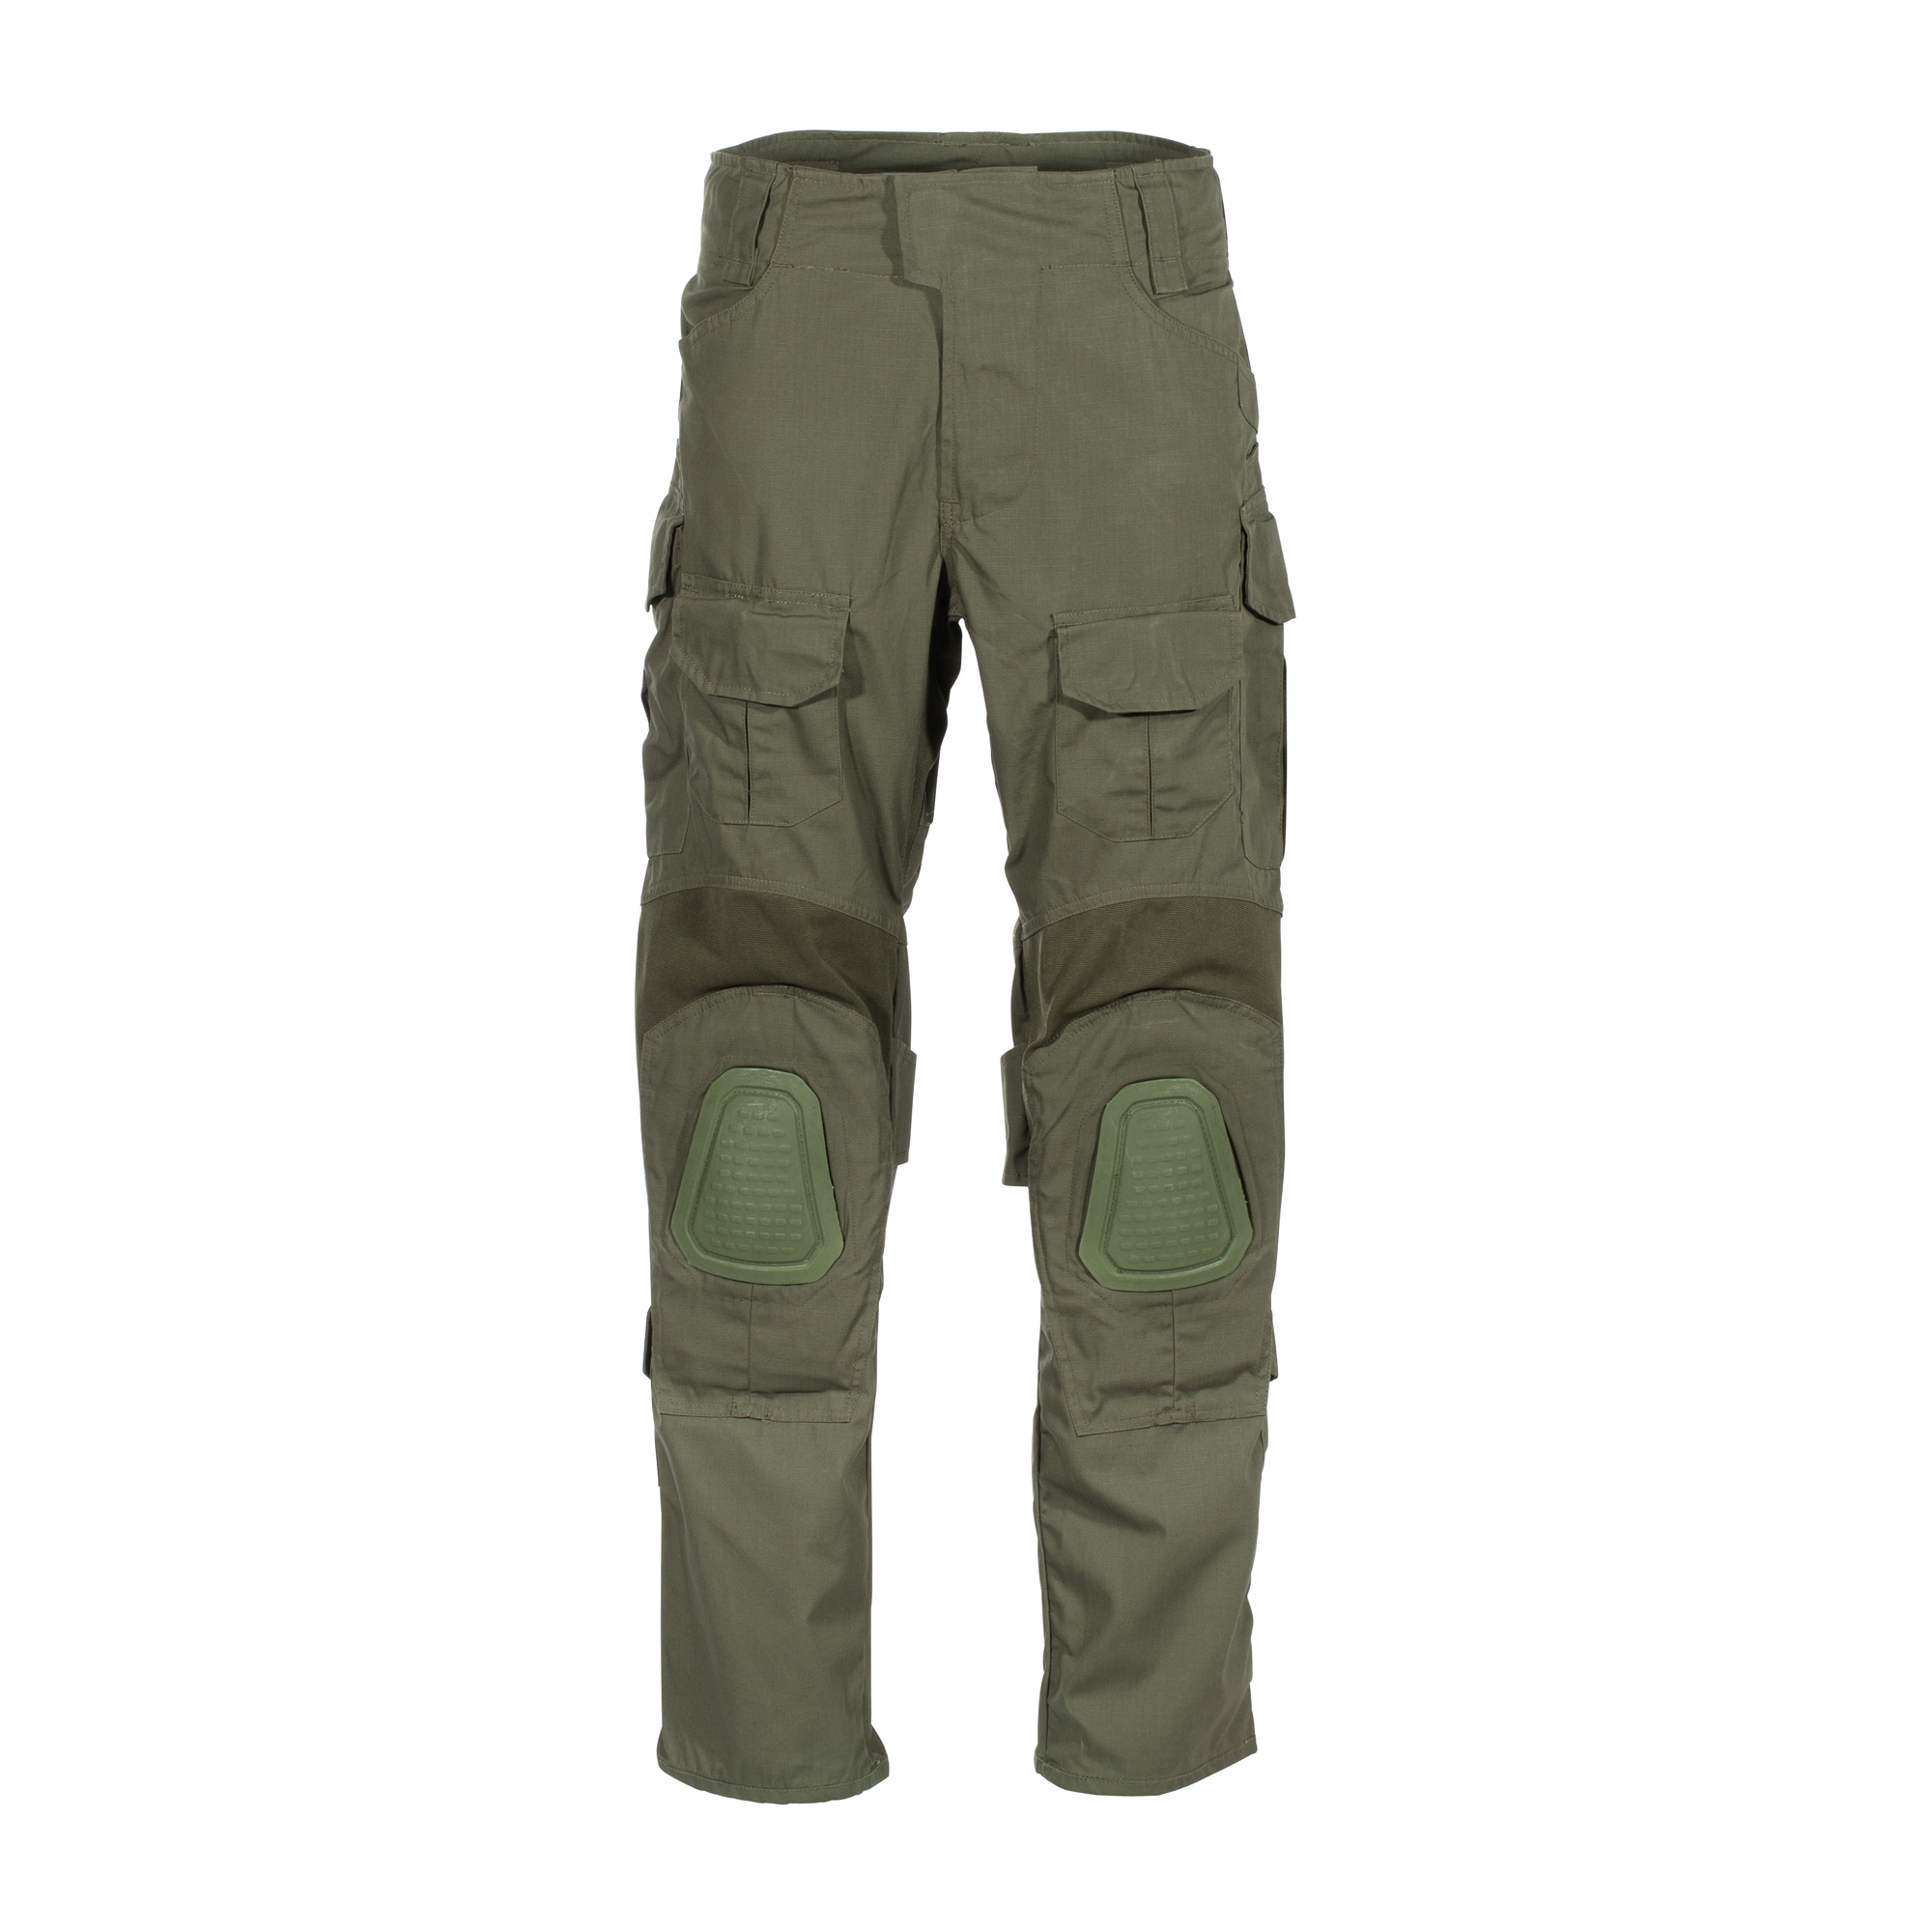 Purchase the Defcon 5 Gladio Tactical Pants od green by ASMC